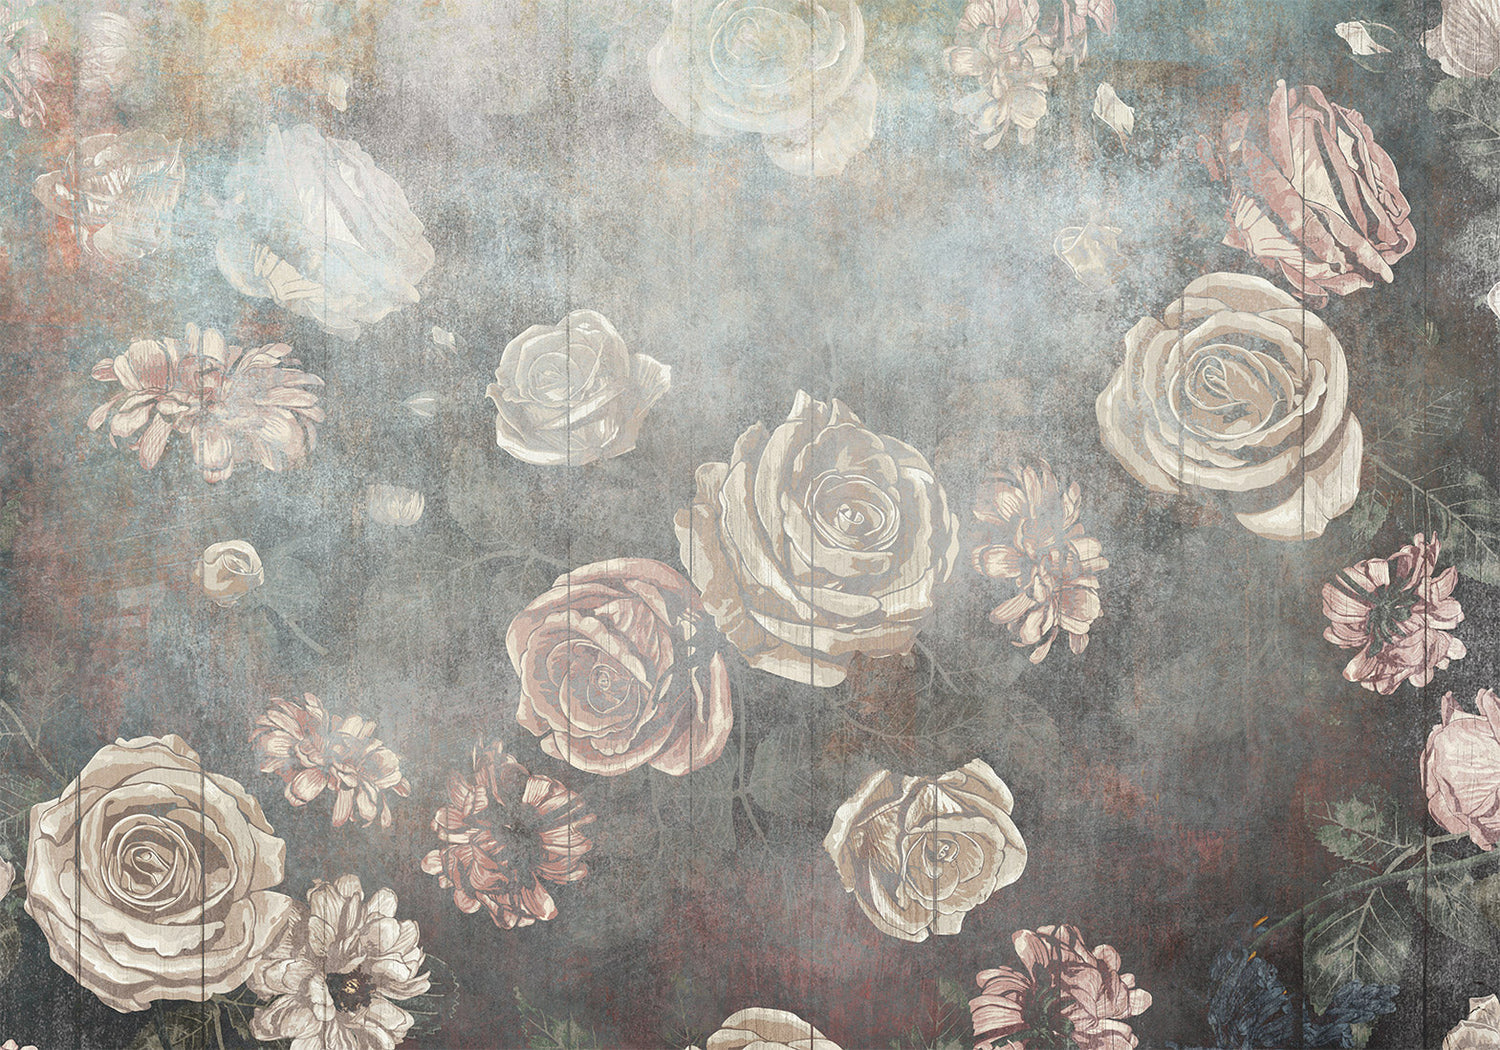 Peel & Stick Floral Wall Mural - Misty Roses - Removable Wallpaper